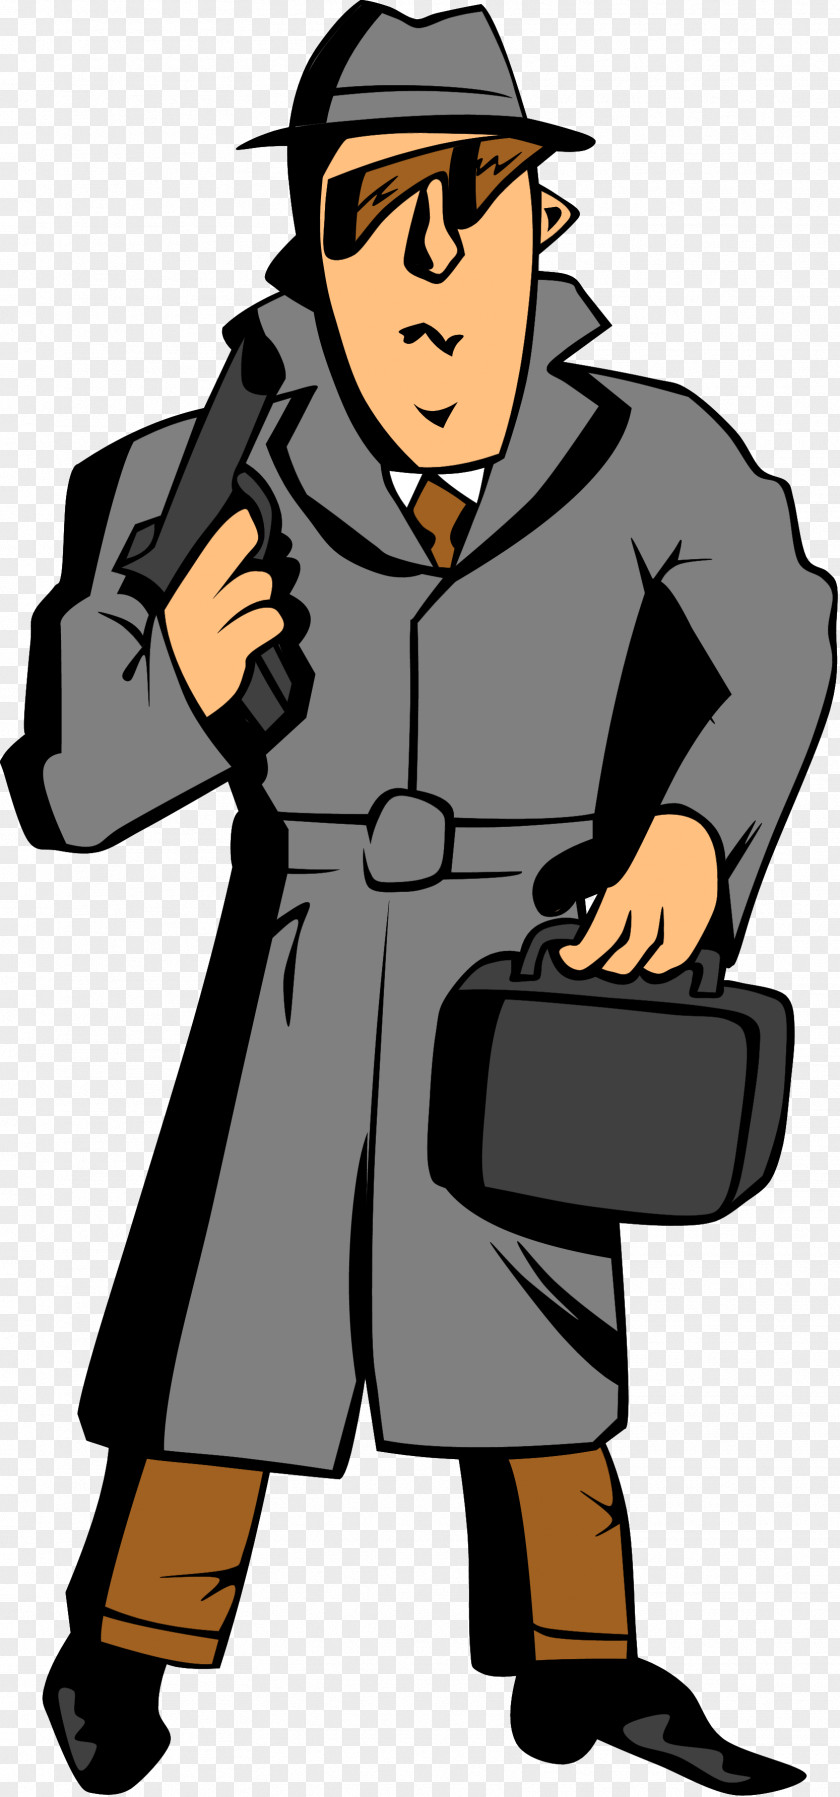 What The Hell Espionage Spy Film Download Clip Art PNG